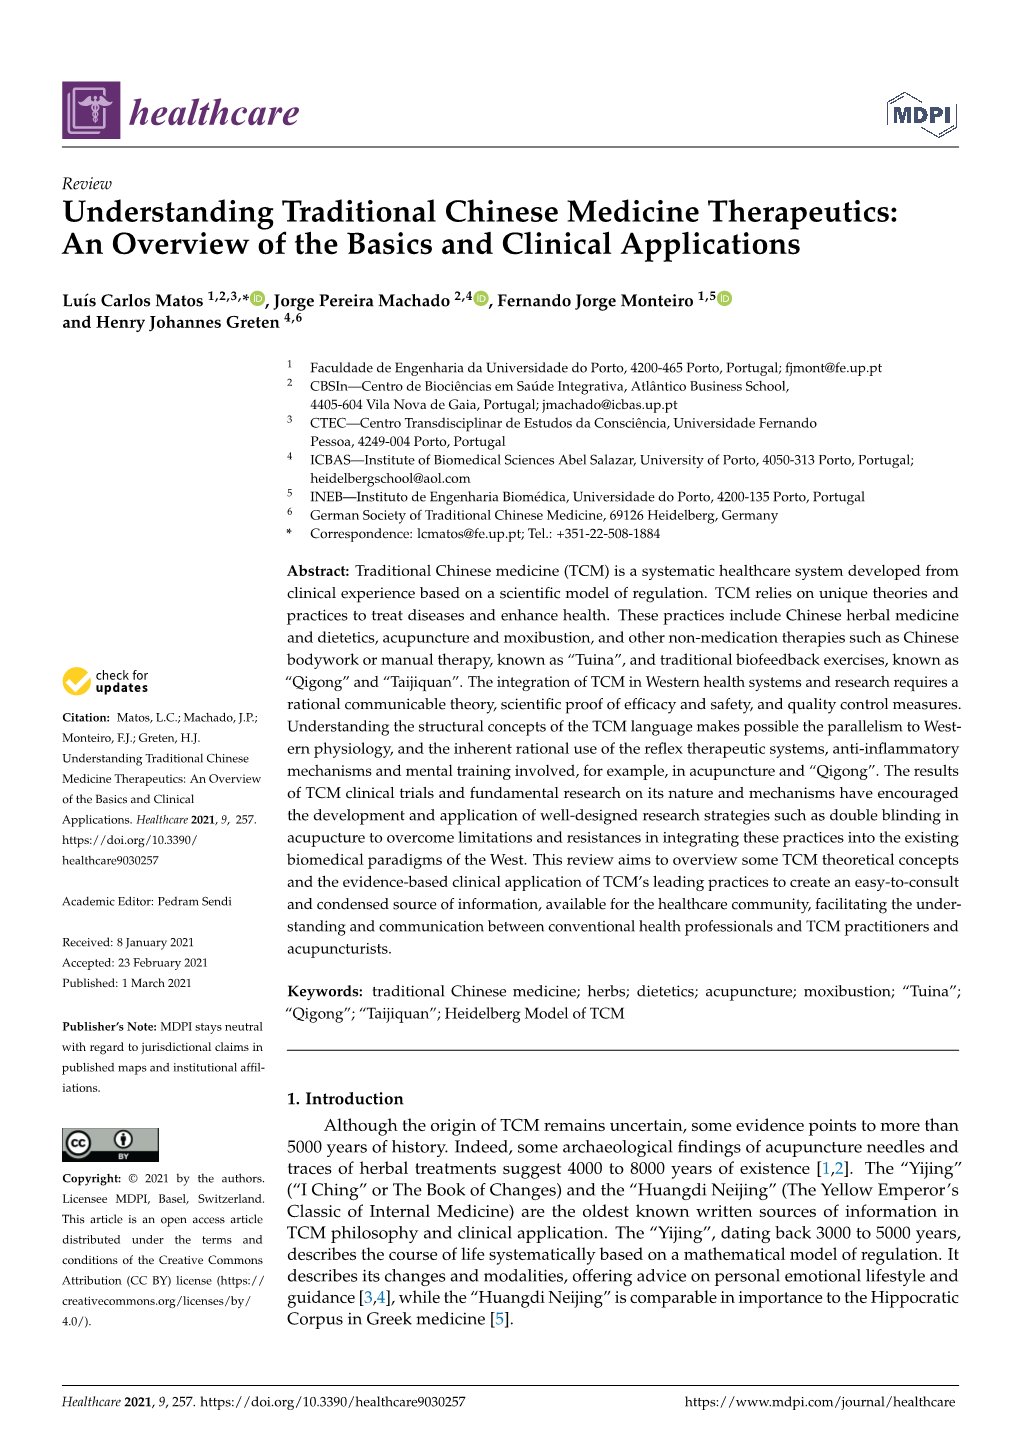 Understanding Traditional Chinese Medicine Therapeutics: an Overview of the Basics and Clinical Applications